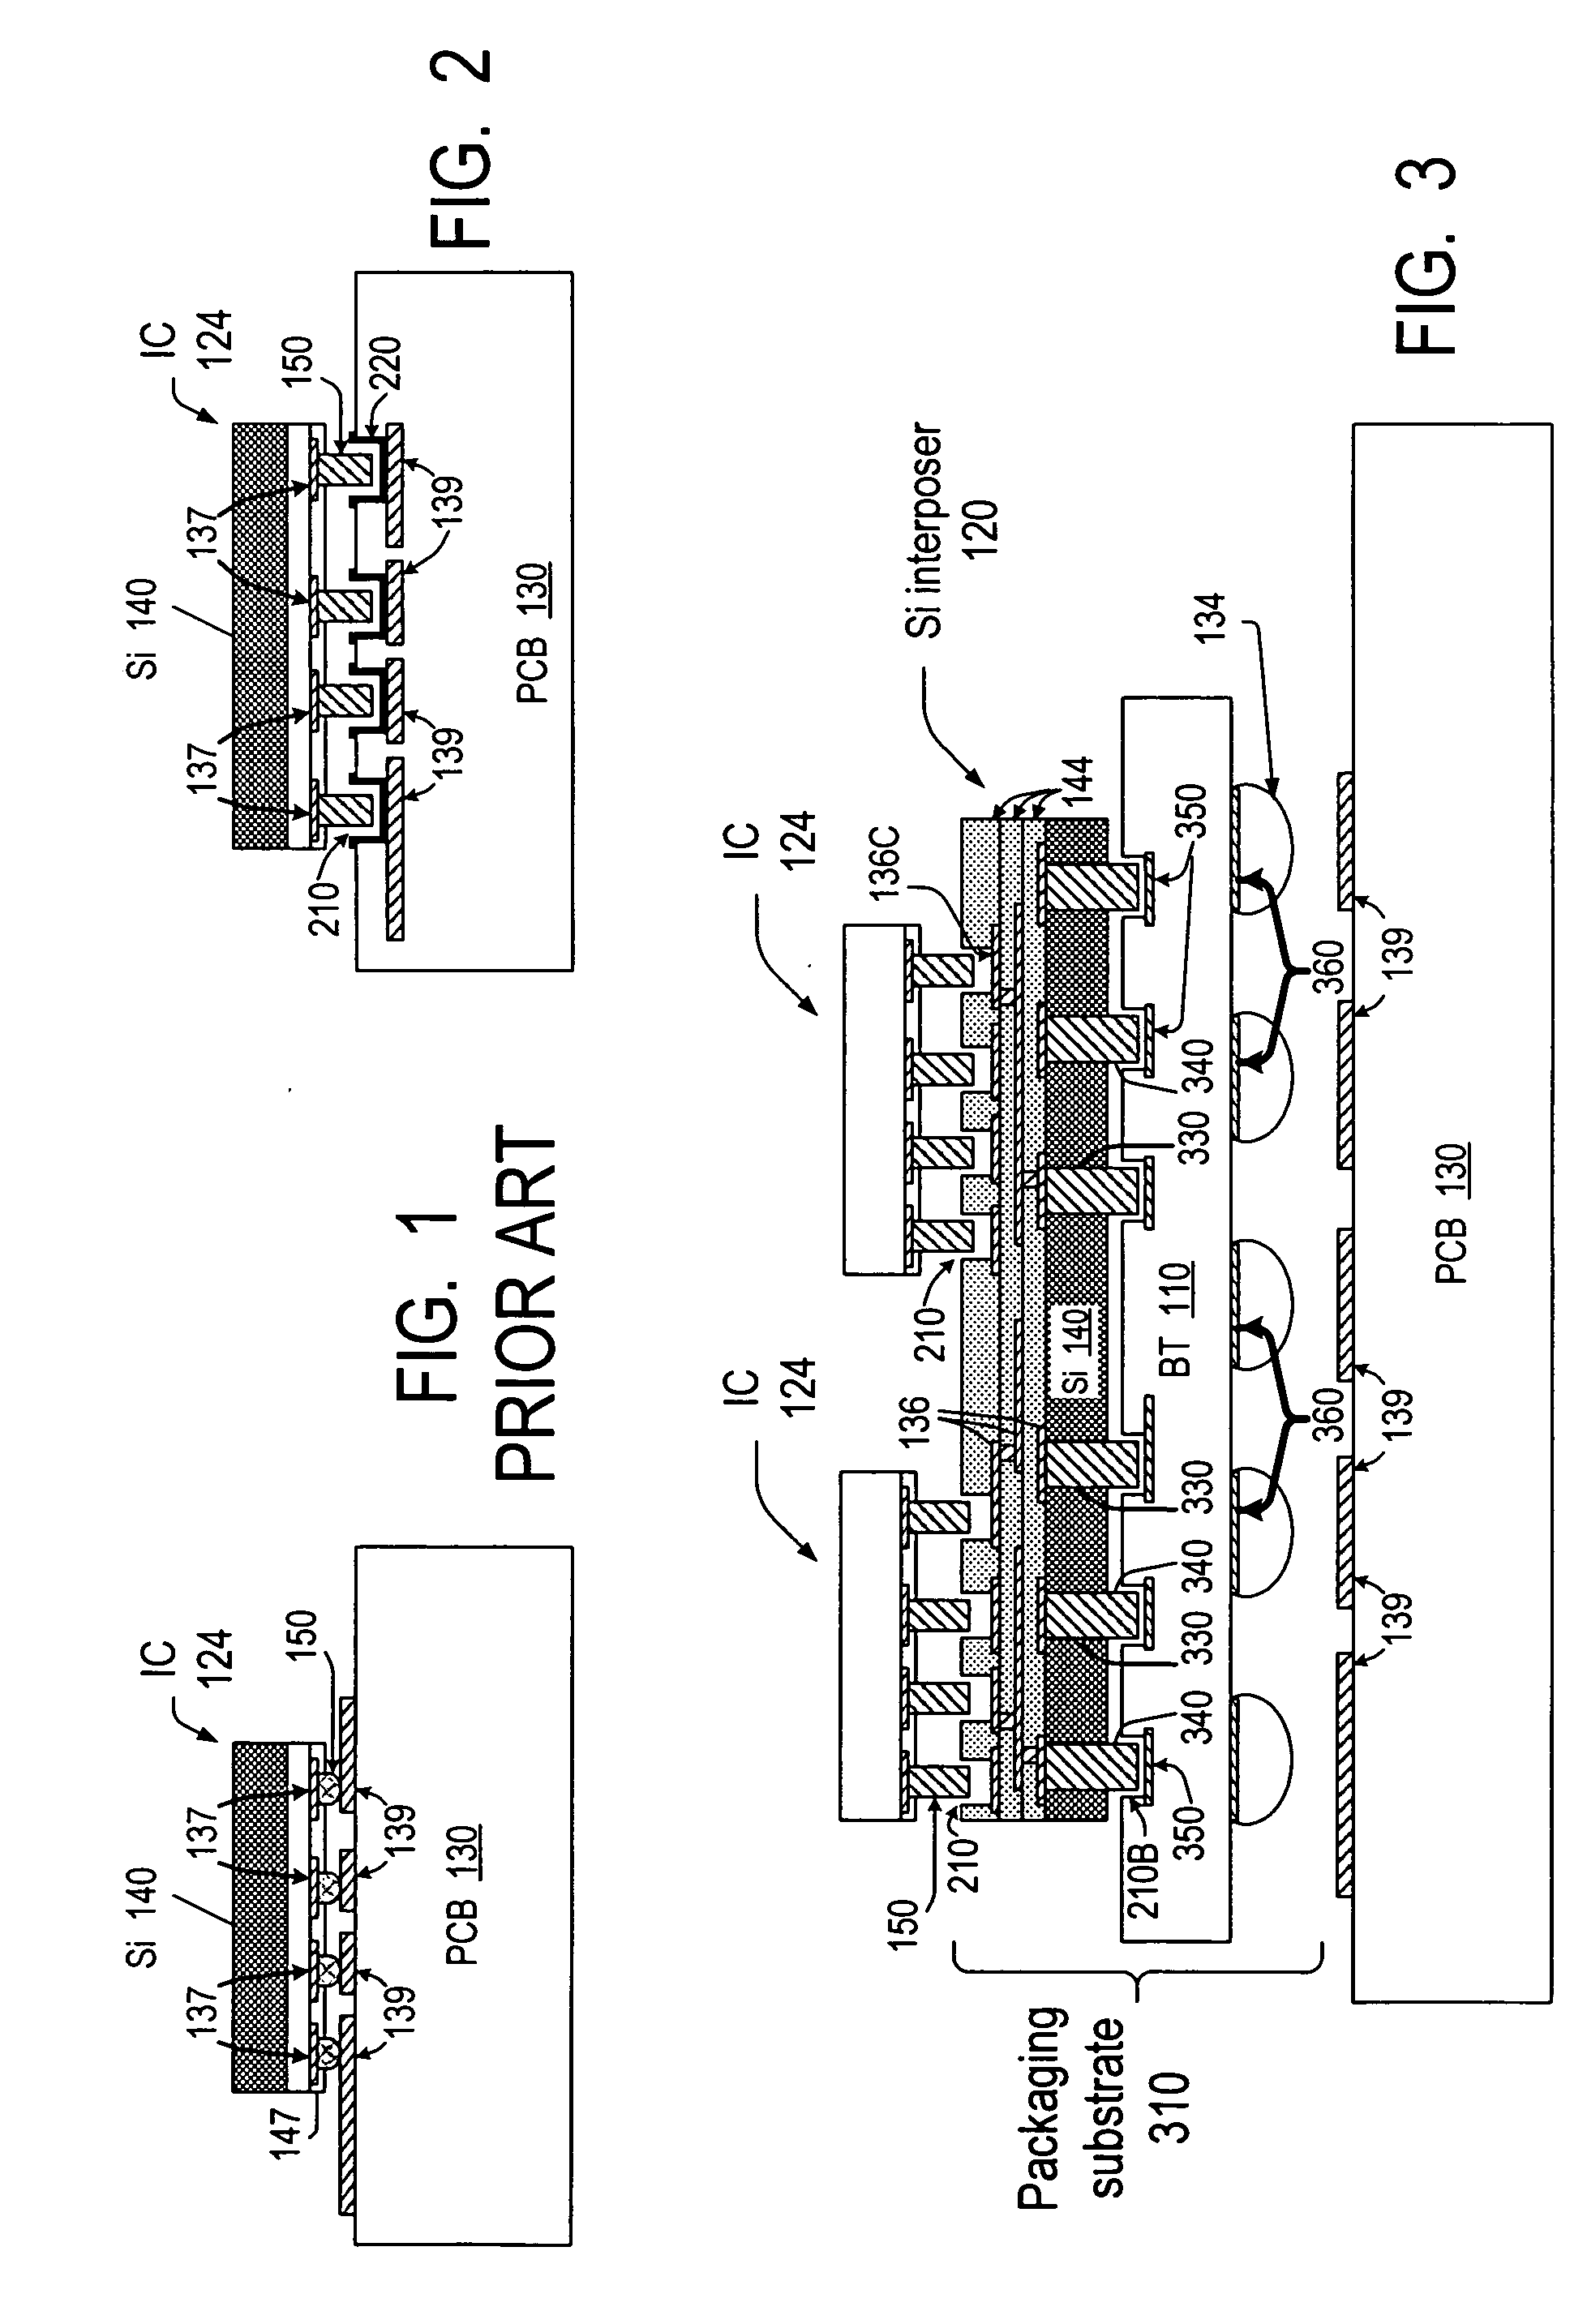 Attachment of integrated circuit structures and other substrates to substrates with vias